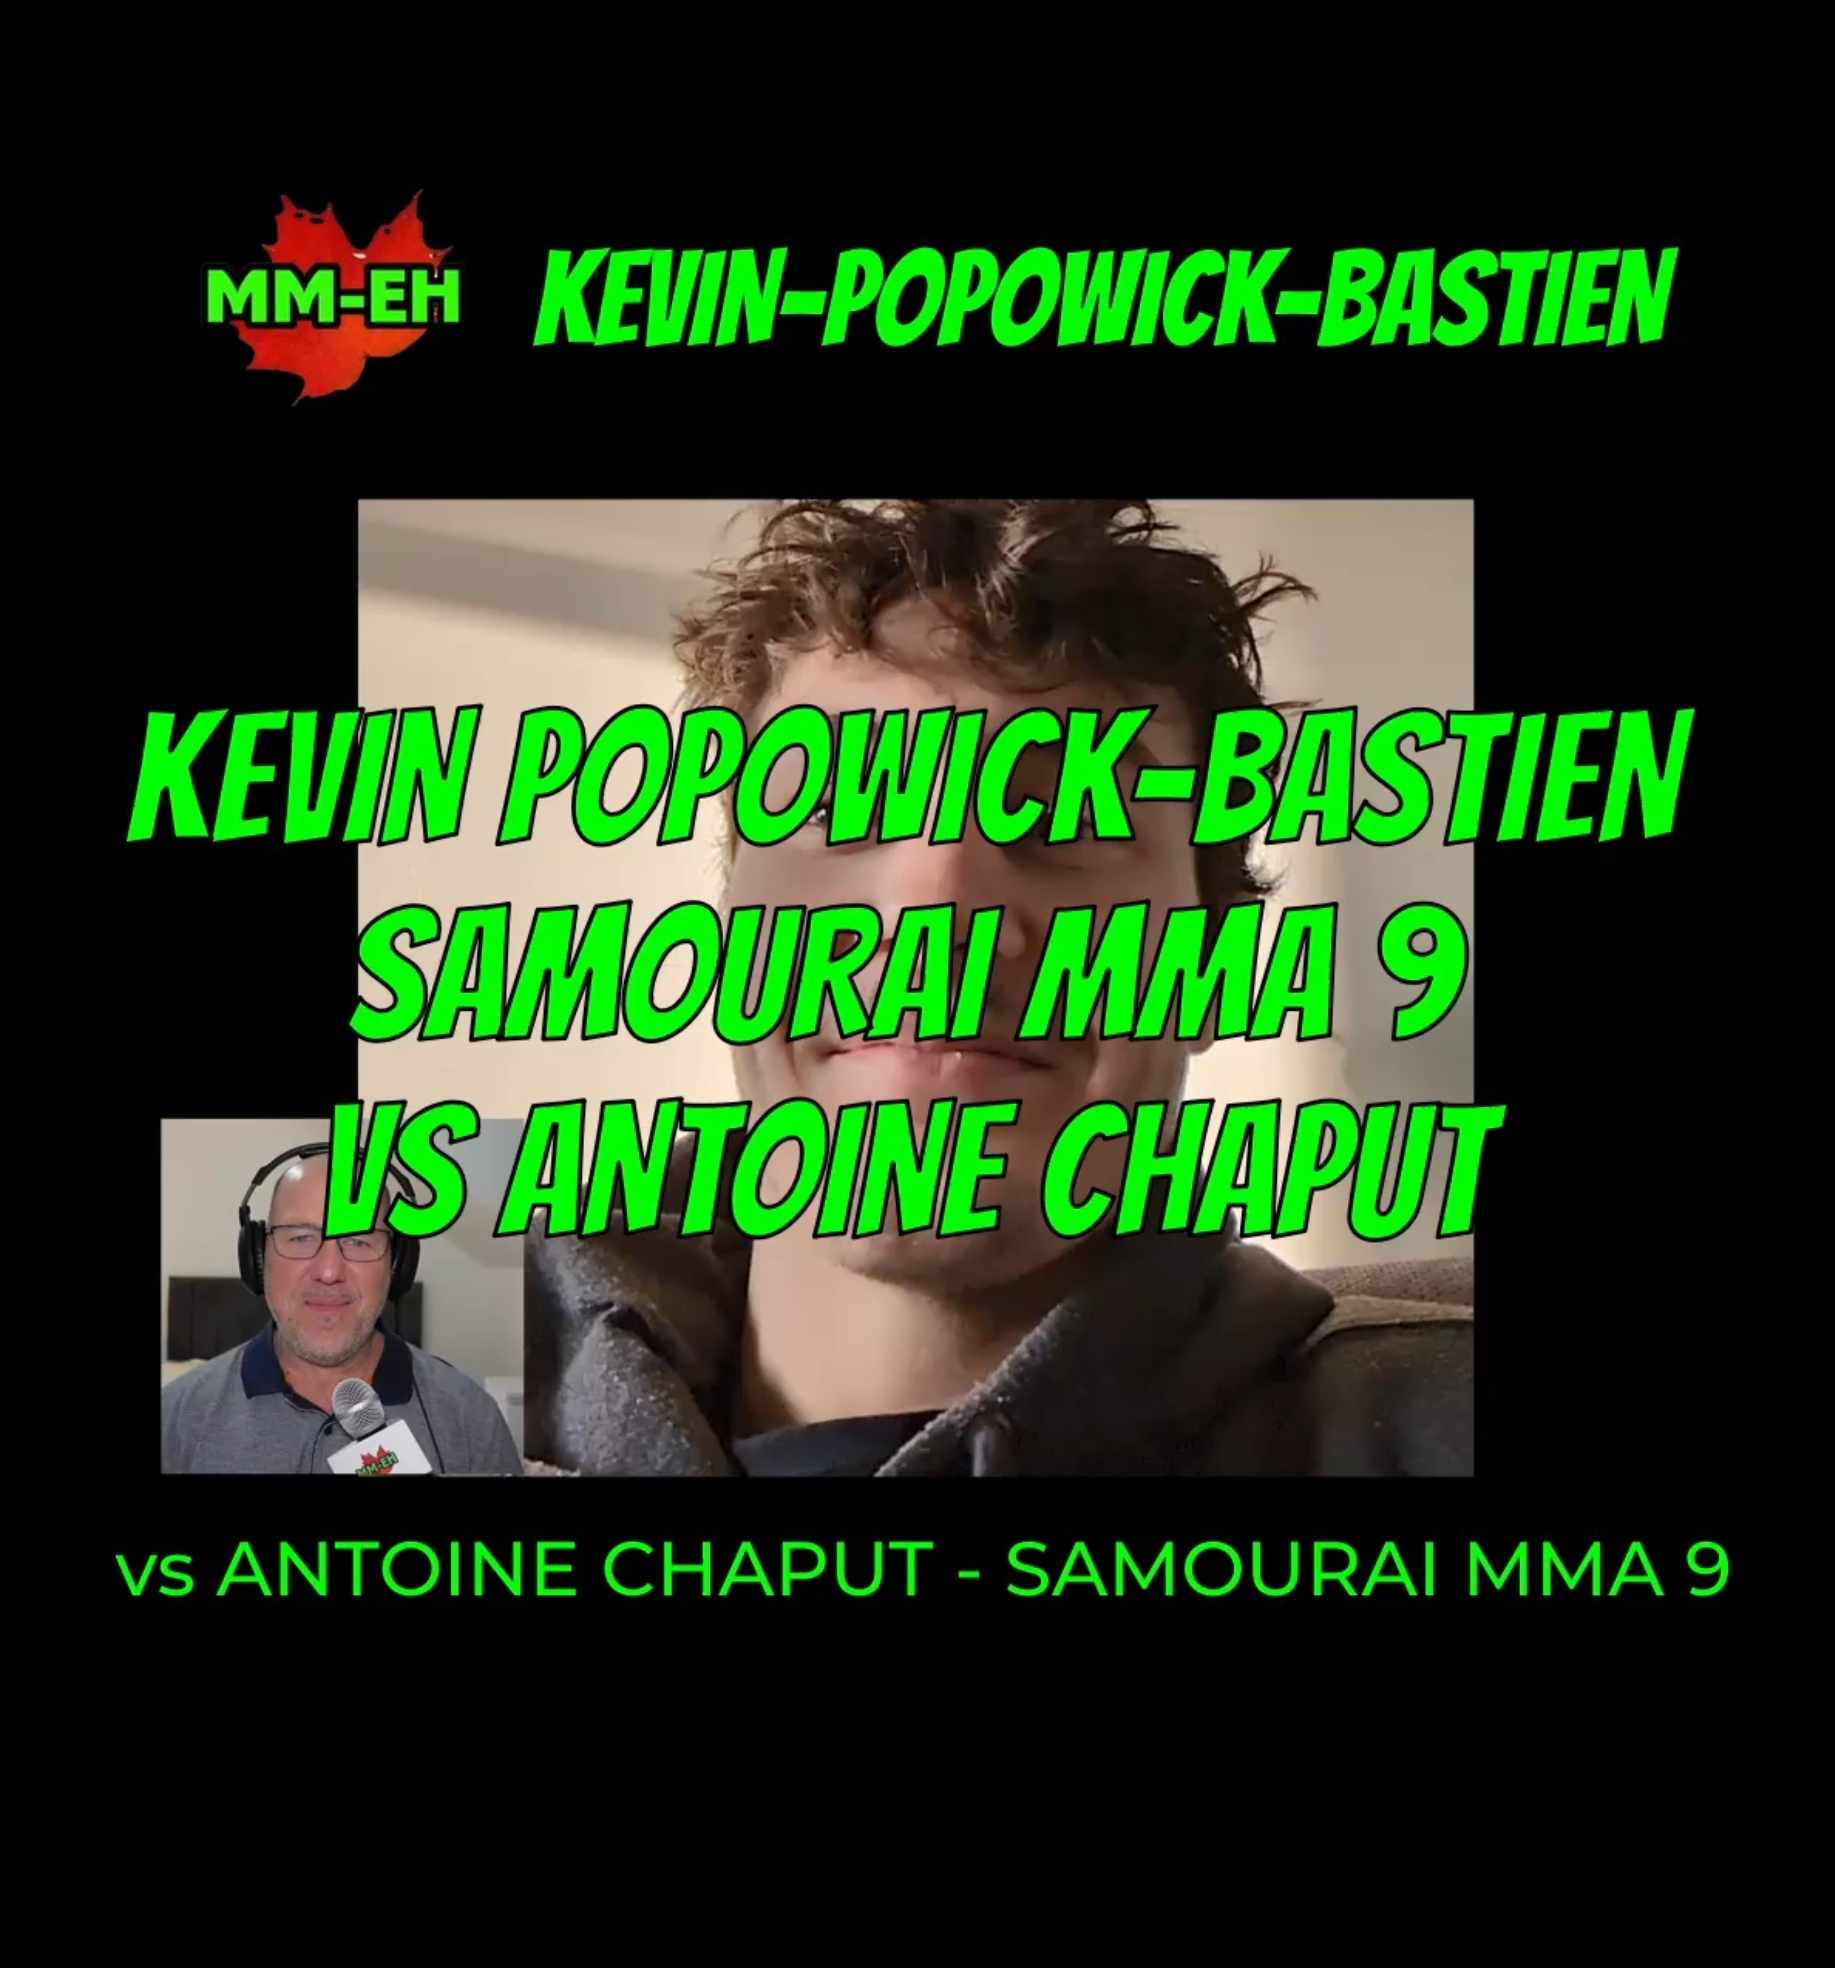 VIDEO: Kevin Popowick-Bastien Says Antoine Chaput “Just Another Fight” At Samourai MMA 9